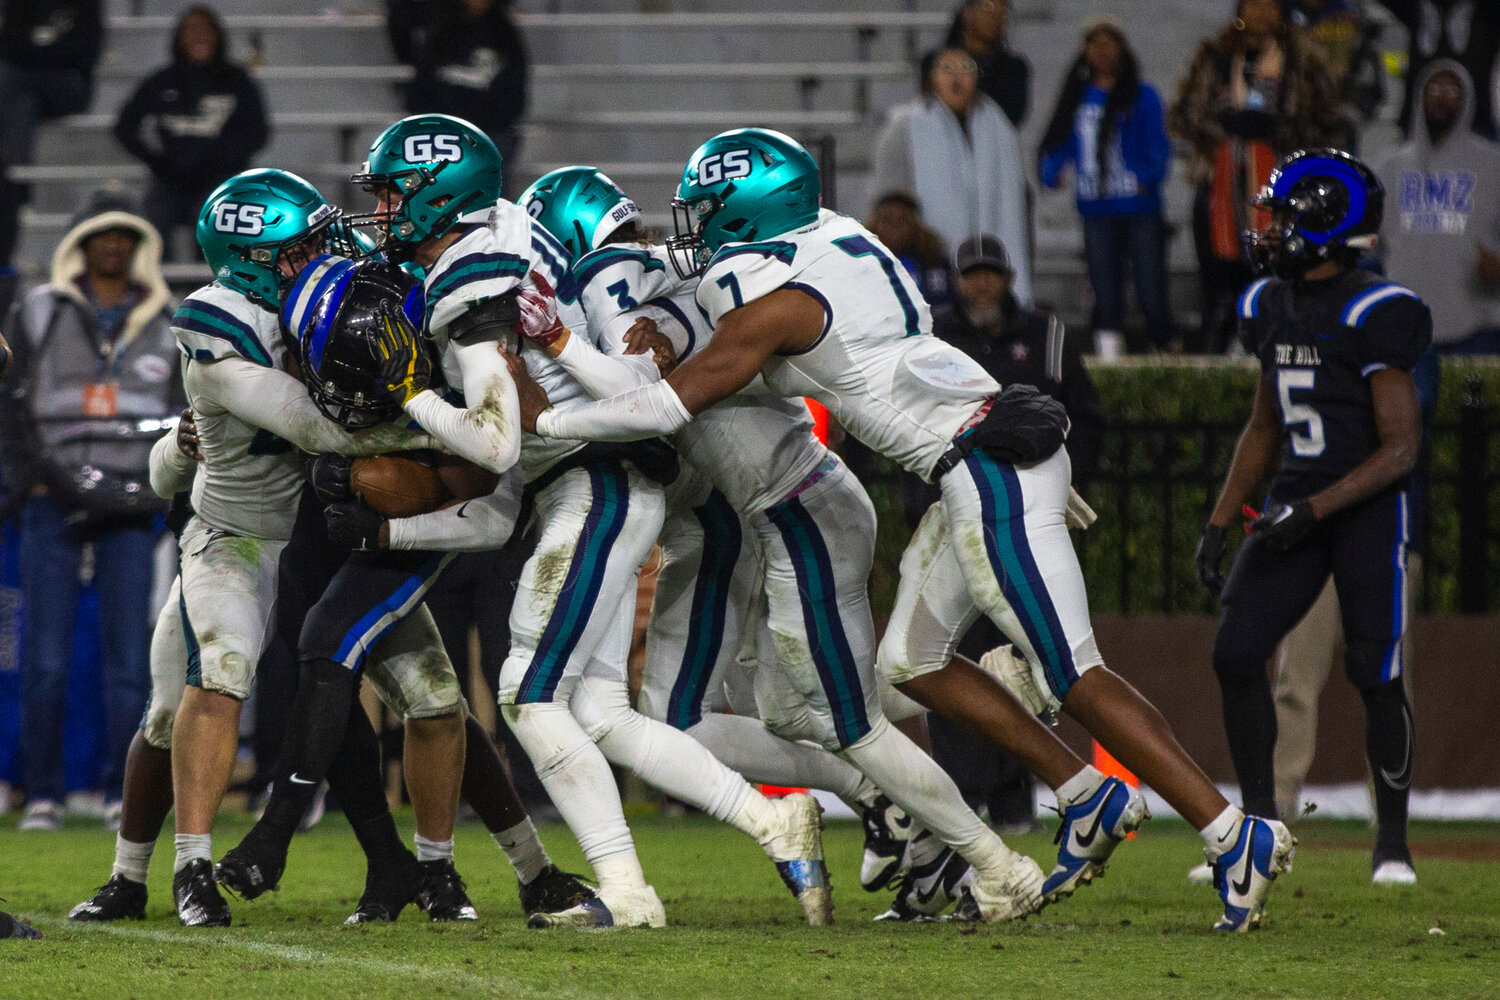 A pod of Gulf Shores Dolphins, including Landon Everett (20), Carter Byrd (4), Blaize Thomas (3) and Jamichael Garrett (7), converge for a stop on a Ramsay ballcarrier during the Class 5A state championship game at Bryant-Denny Stadium on Thursday, Dec. 7. The Gulf Shores defense set a program record for fewest points allowed in a season as part of five shutout efforts.